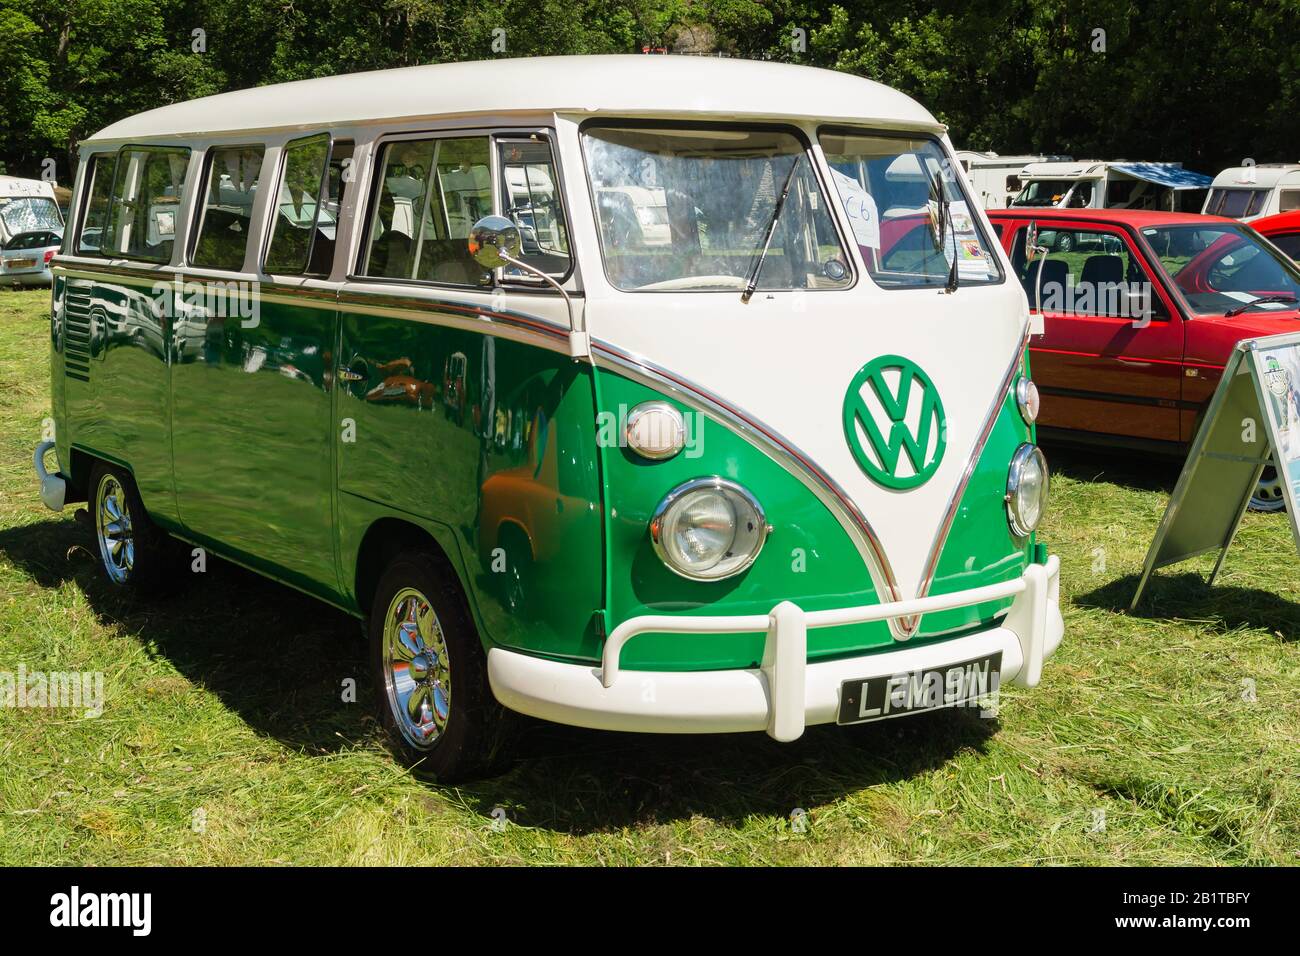 Volkswagen Type 2 split screen microbus or camper van a classic German  utility vehicle built from 1950 and 1967 Stock Photo - Alamy